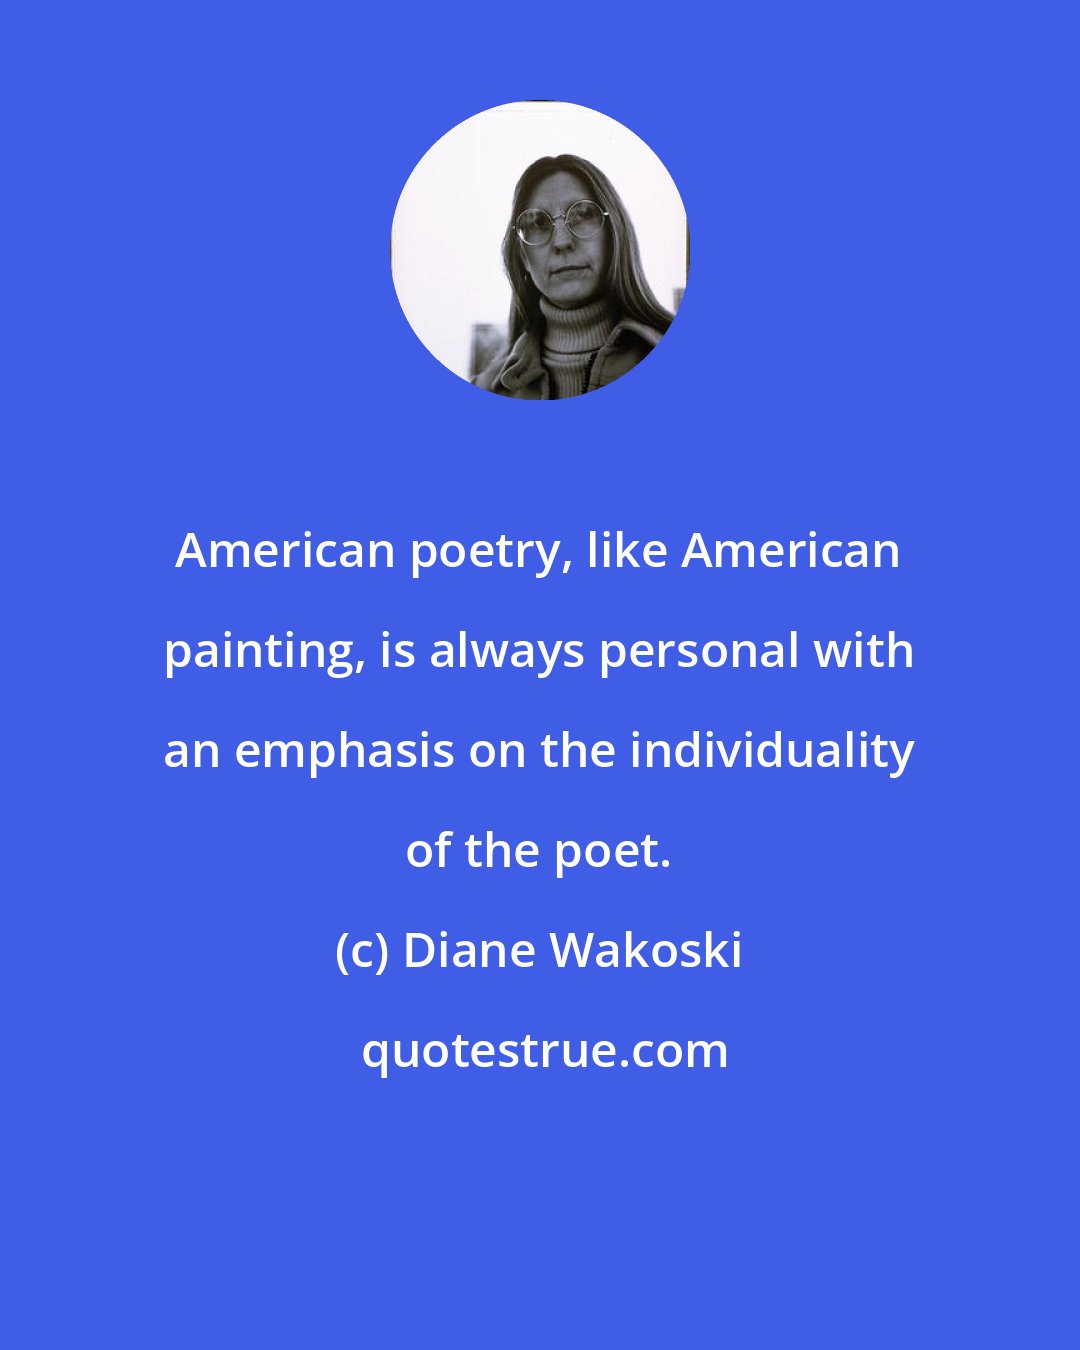 Diane Wakoski: American poetry, like American painting, is always personal with an emphasis on the individuality of the poet.